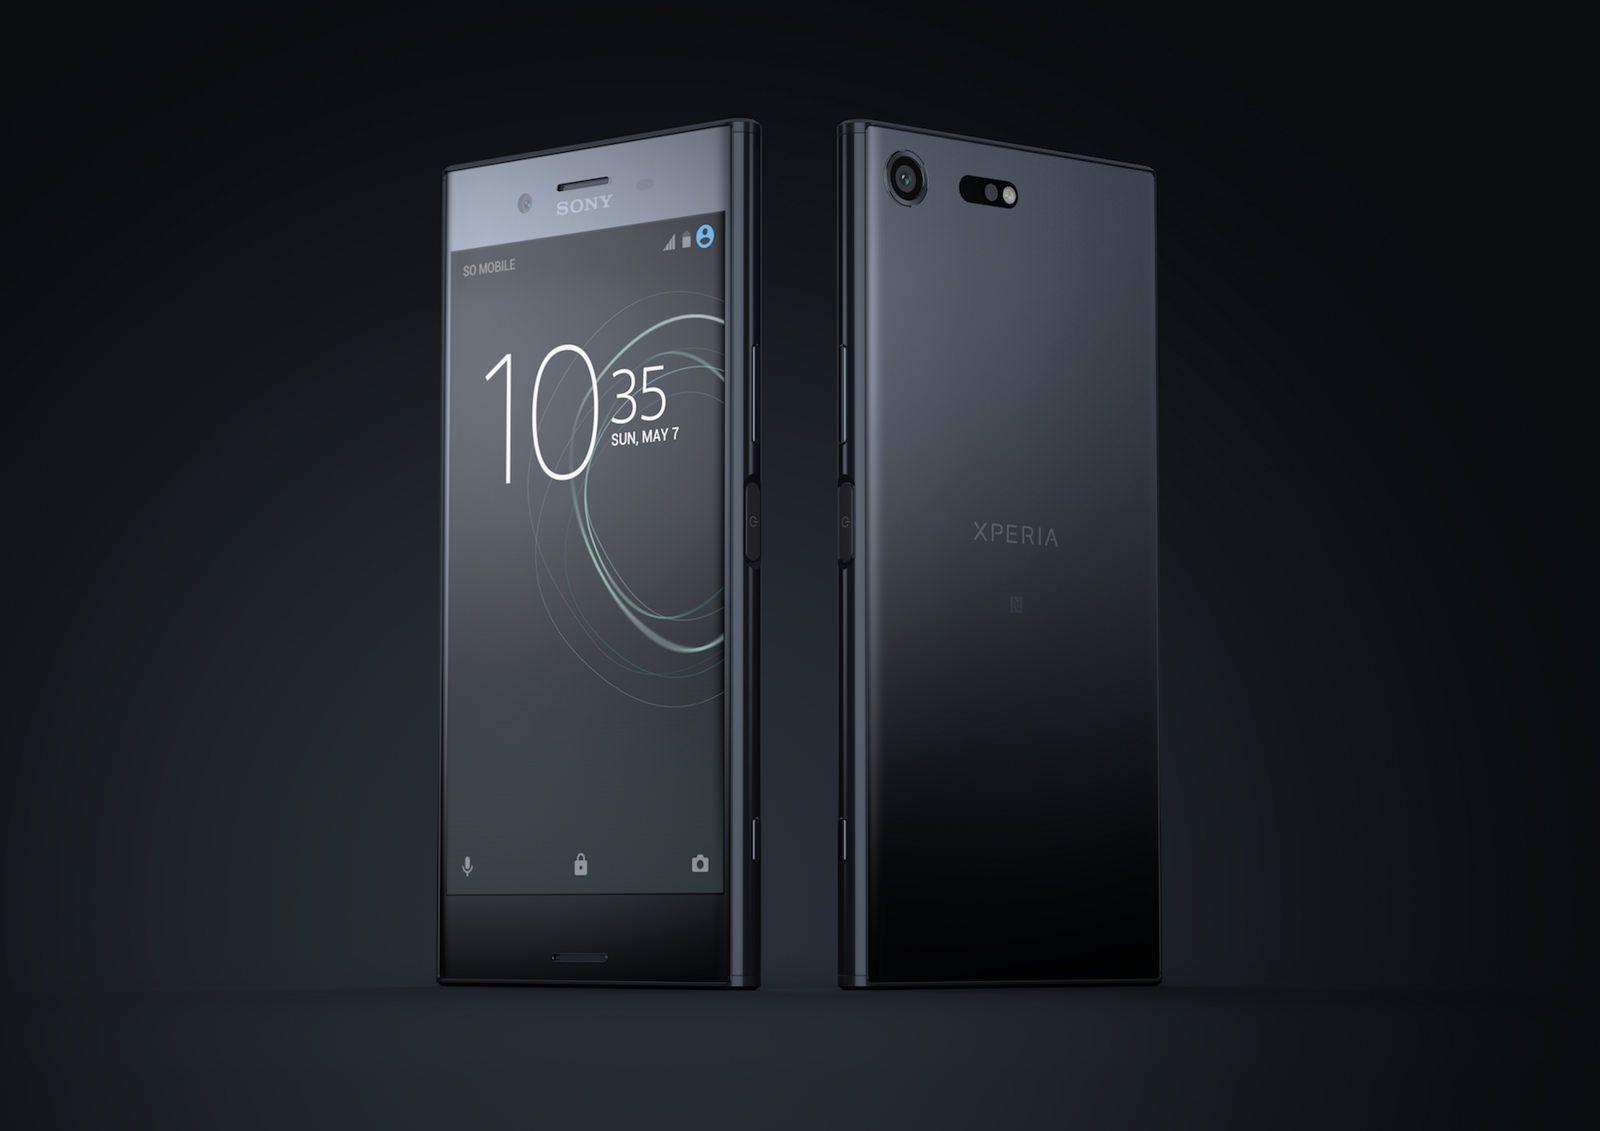 Sony Xperia XZ Premium with 4K HDR display launched at MWC 2017